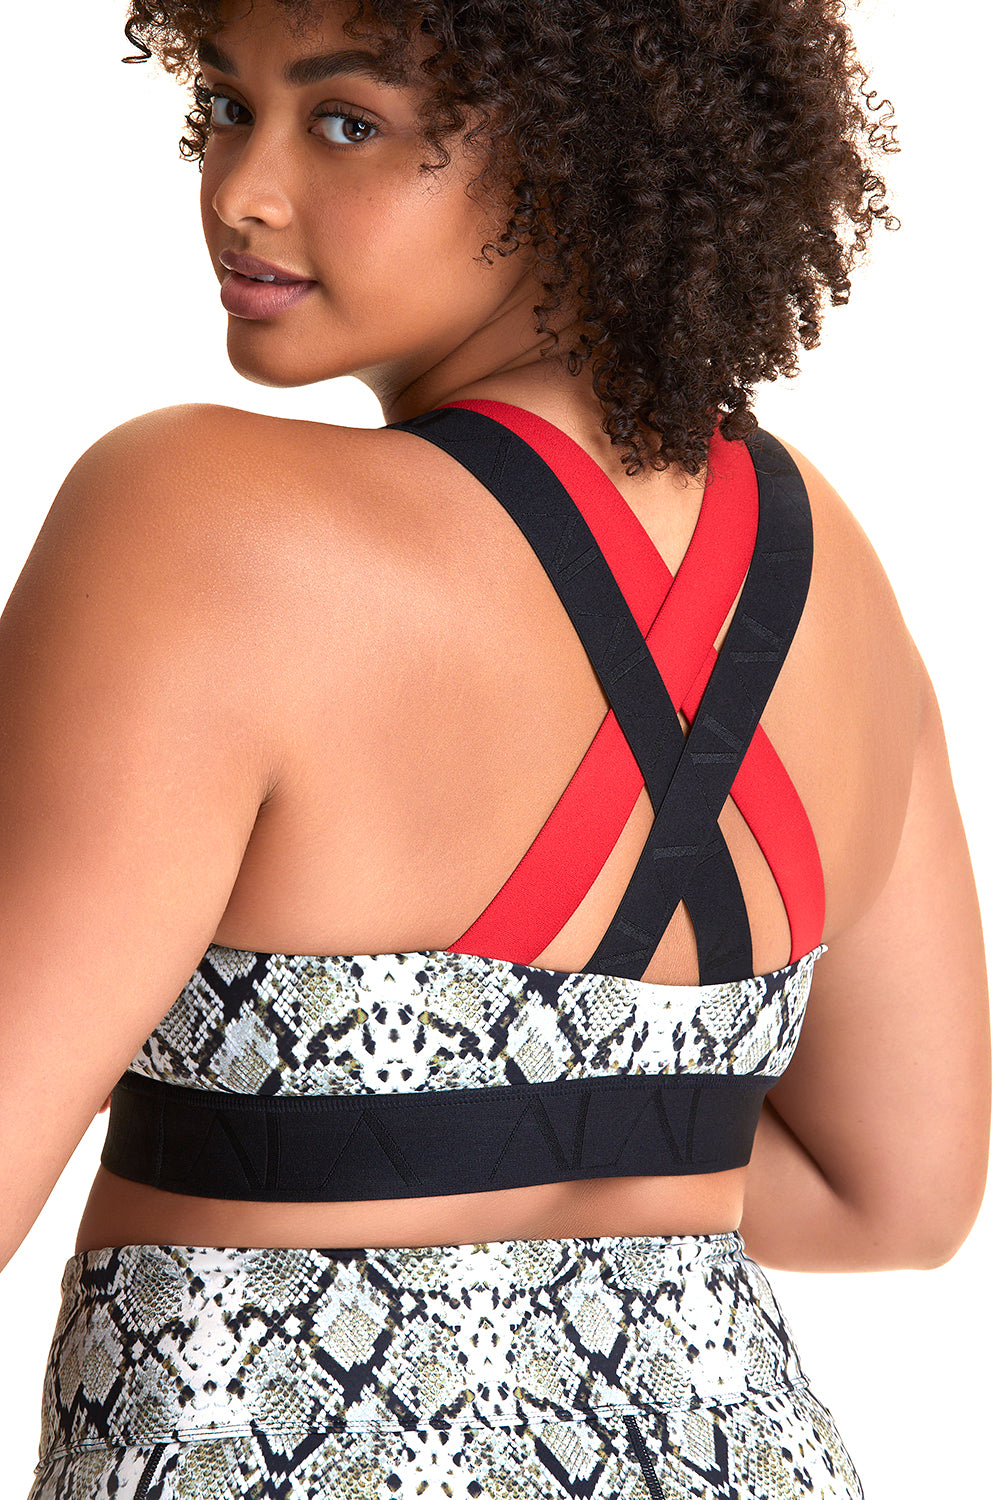 Back view of Alala Women's Luxury Athleisure snakeskin sports bra with red and black cross back straps in plus size